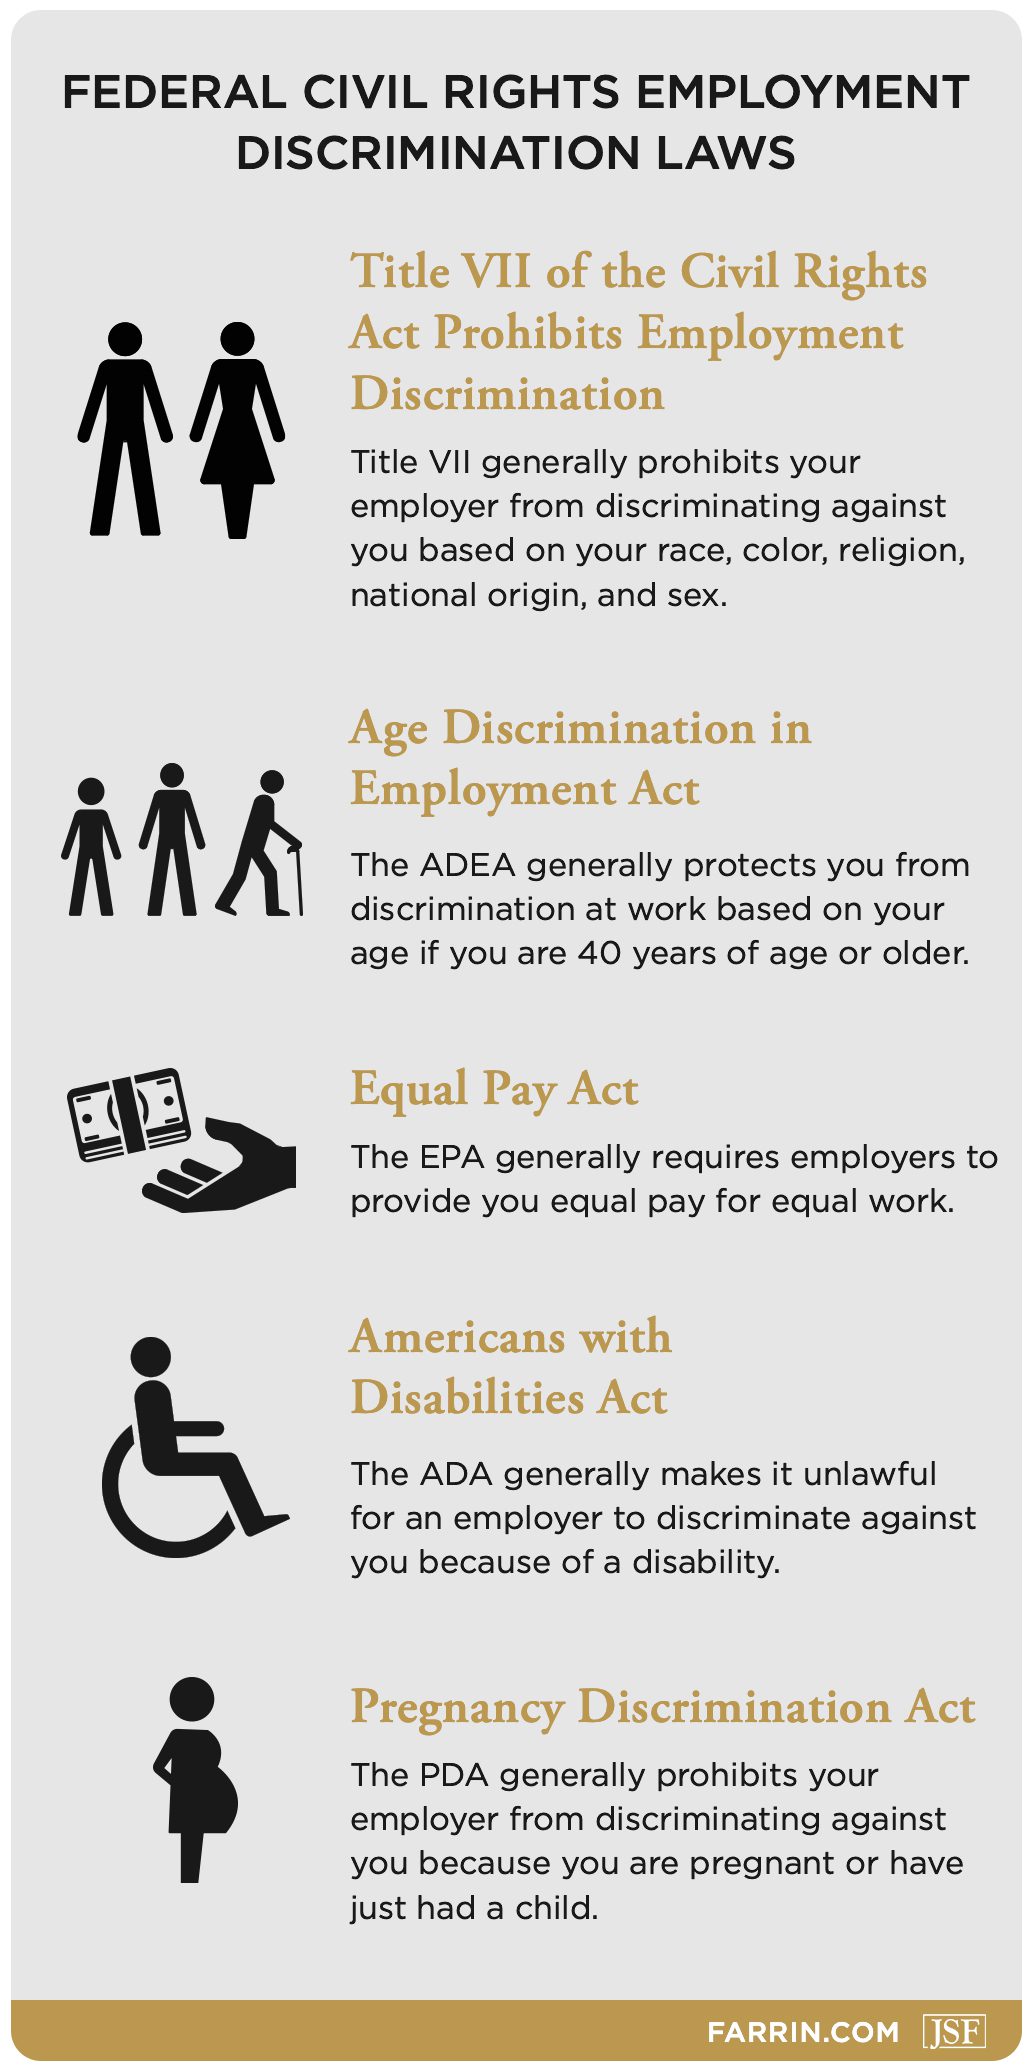 A list of six federal civil rights discrimination laws.